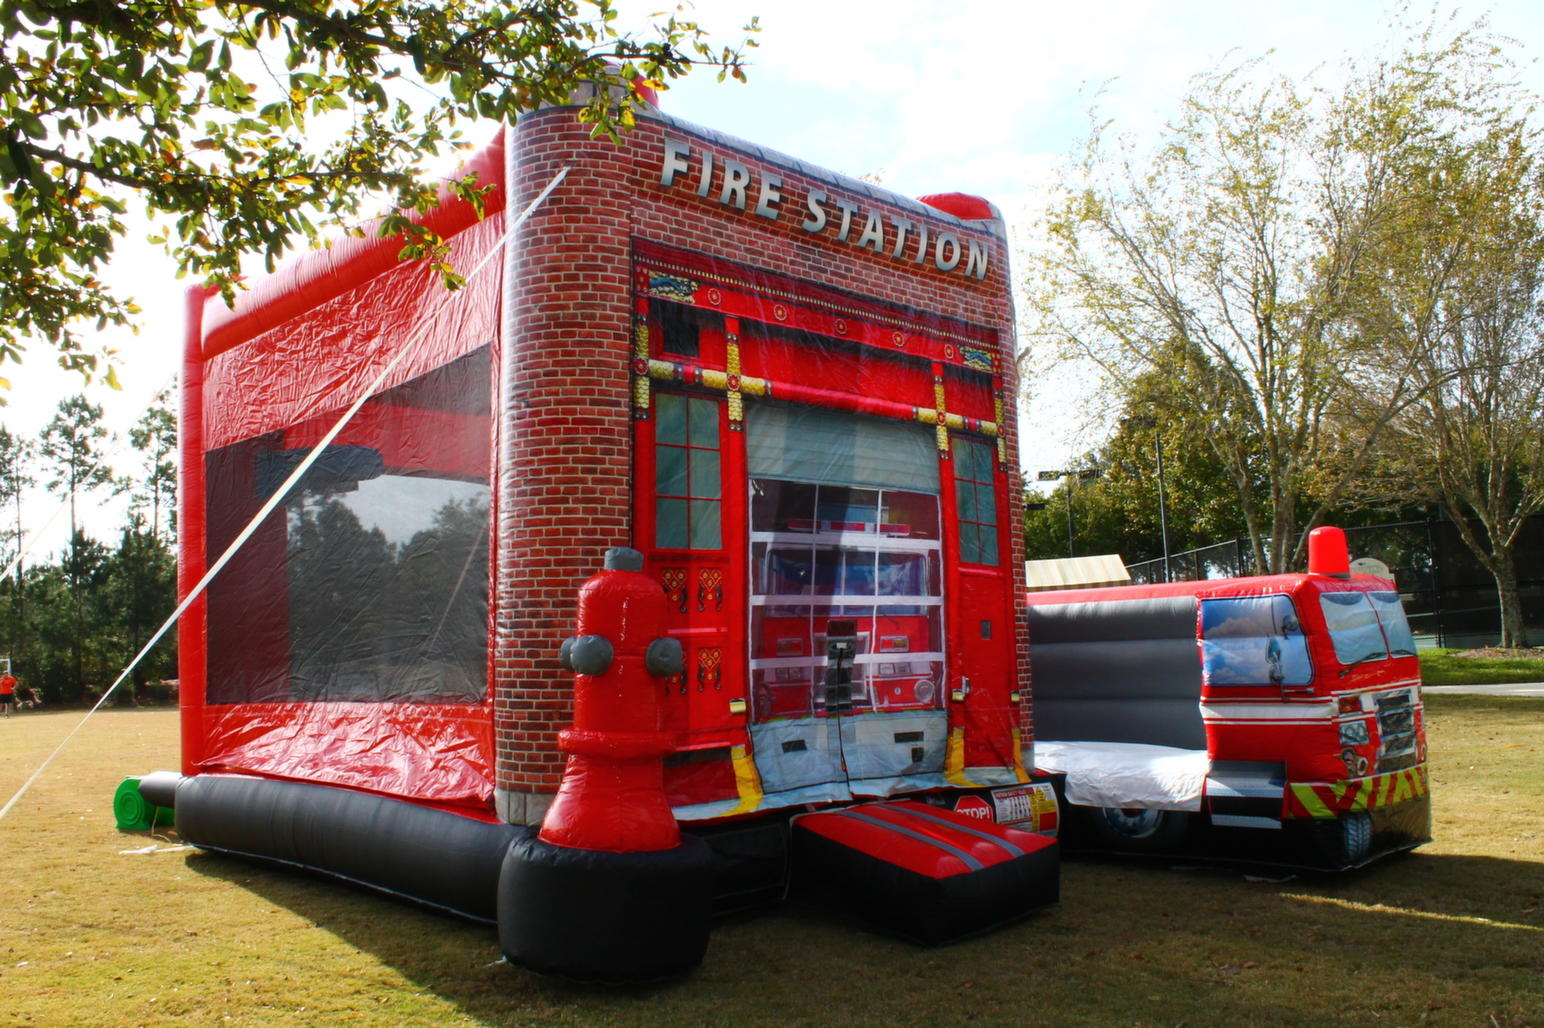 Rent the Fire Station 5-in-1 Combo for your next Touch Truck event or birthday party from Carolina Fun Factory